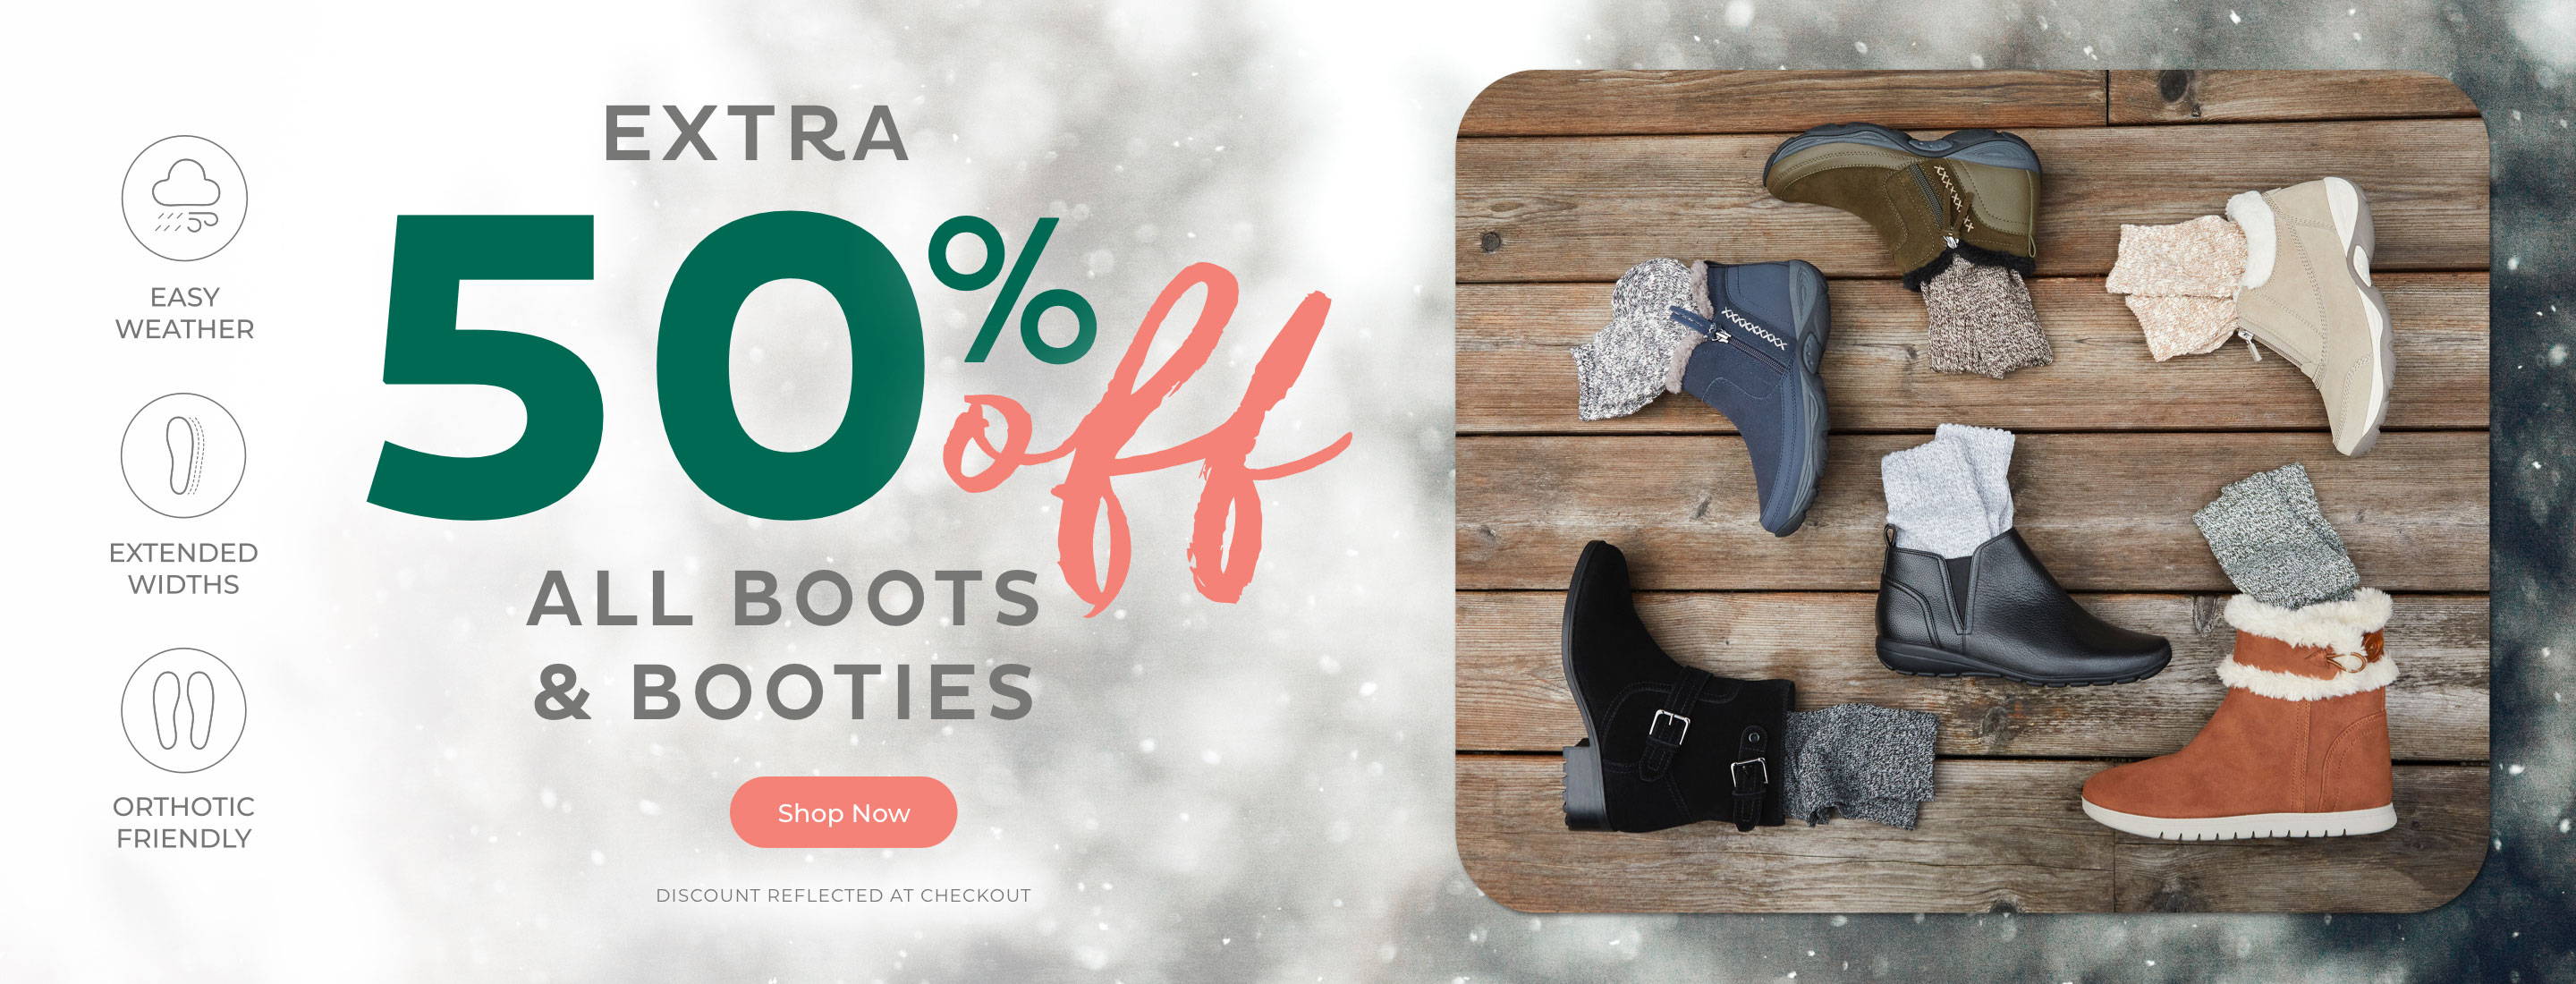 Extra 50% Off All Boots & Booties